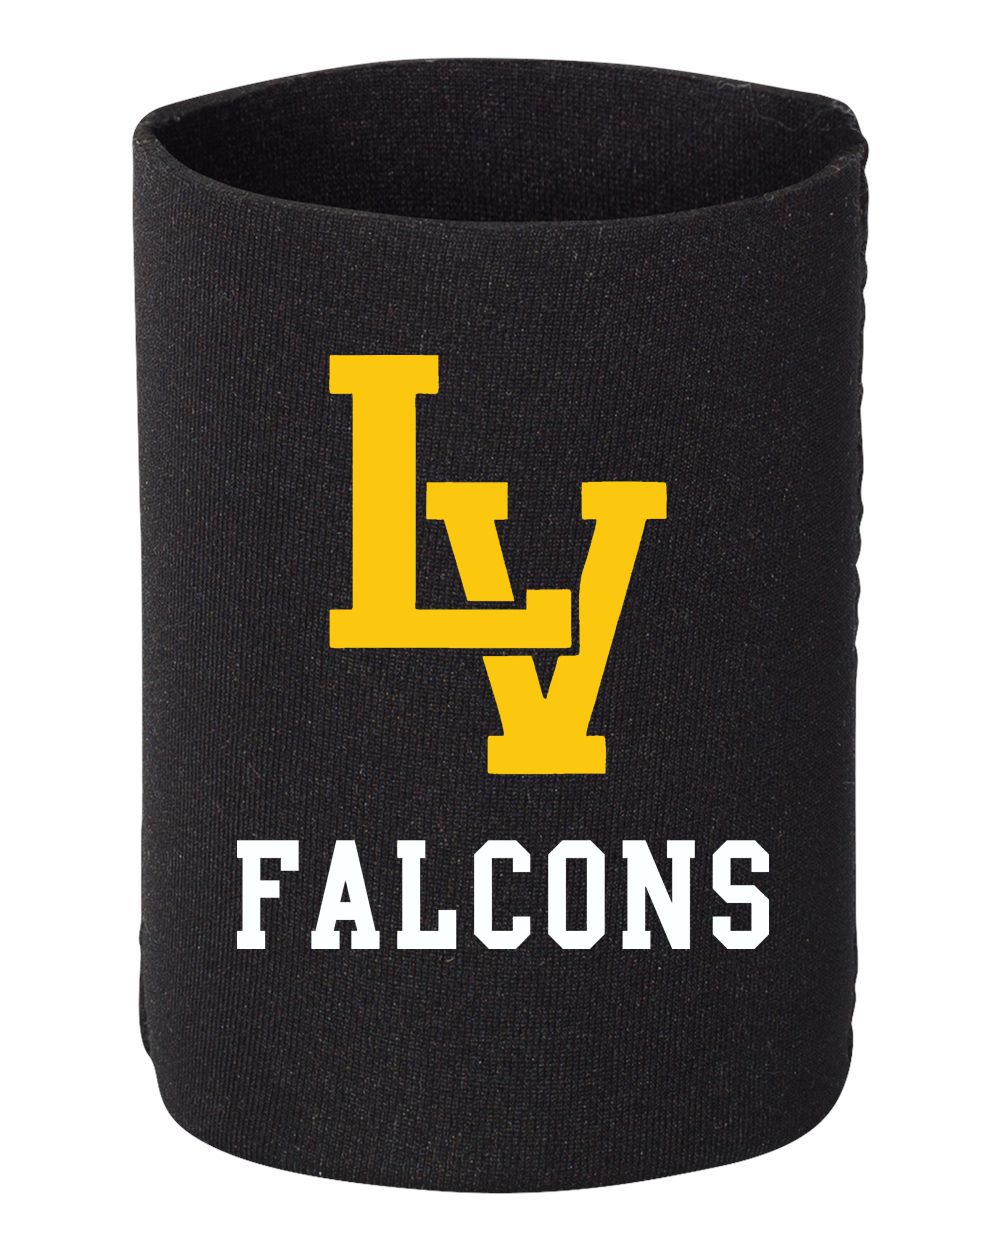 Lakeville Falcons Koozies